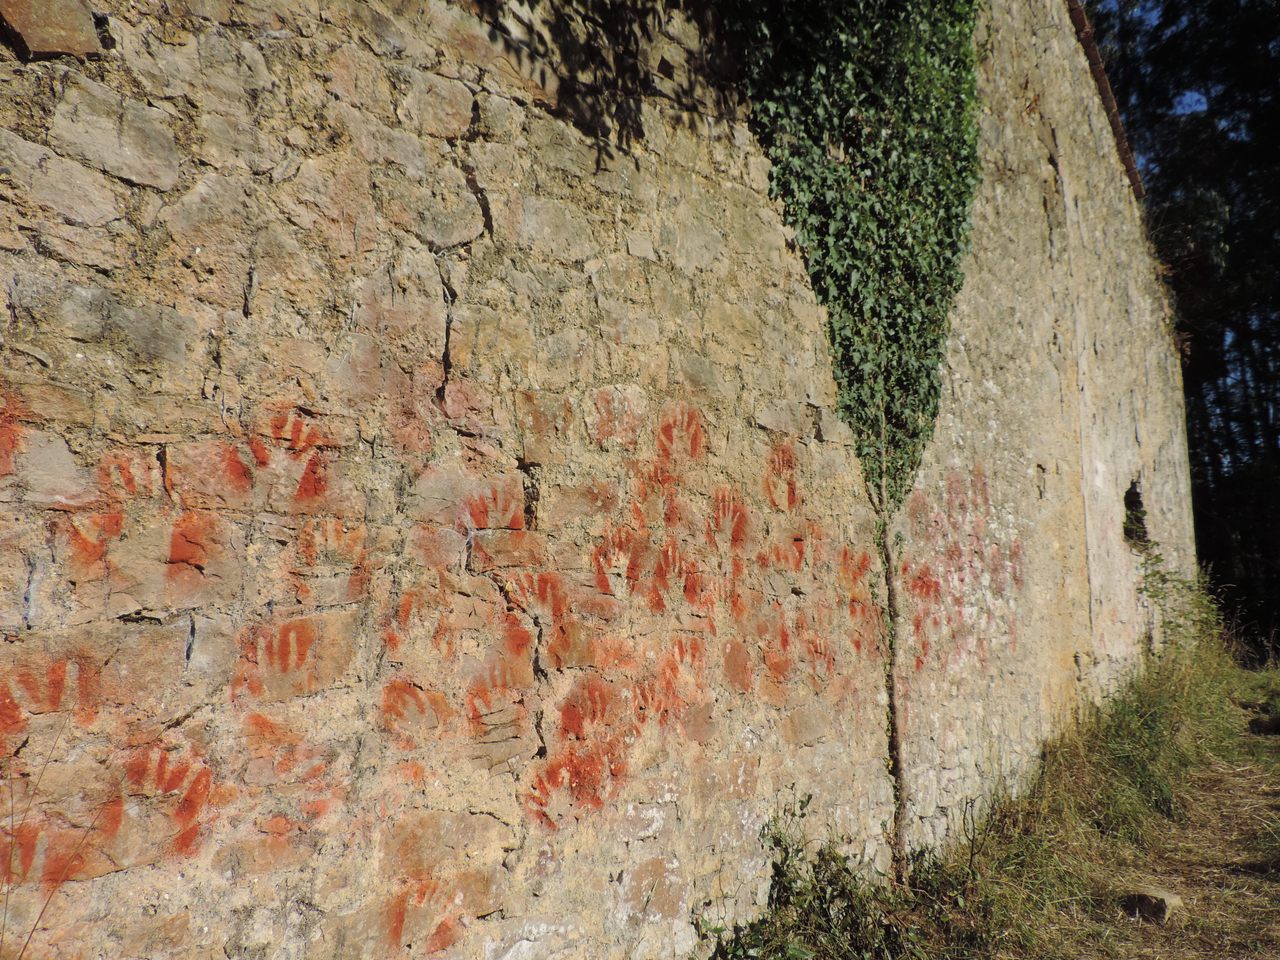 Volunteers' handprints cover a limestone wall, part of an experimental archaeology project to understand how ancient humans left their mark in caves throughout Spain and France.